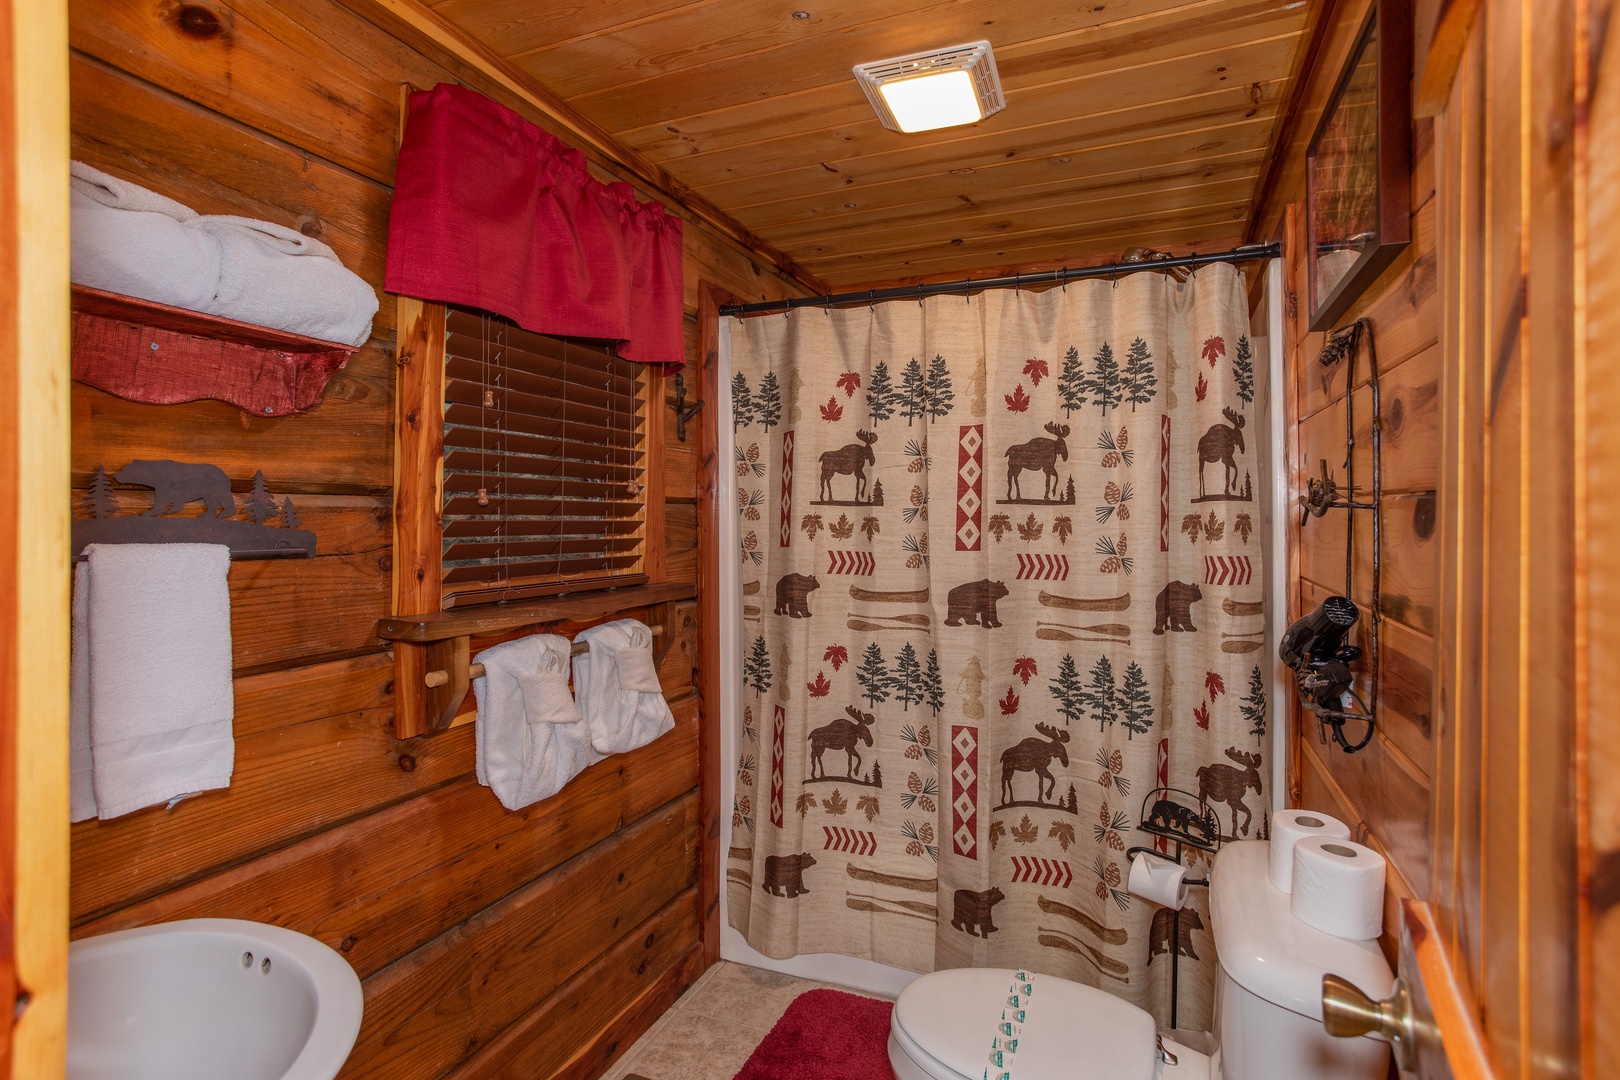 Bathroom with a tub and shower at Moonshiner's Ridge, a 1-bedroom cabin rental located in Pigeon Forge